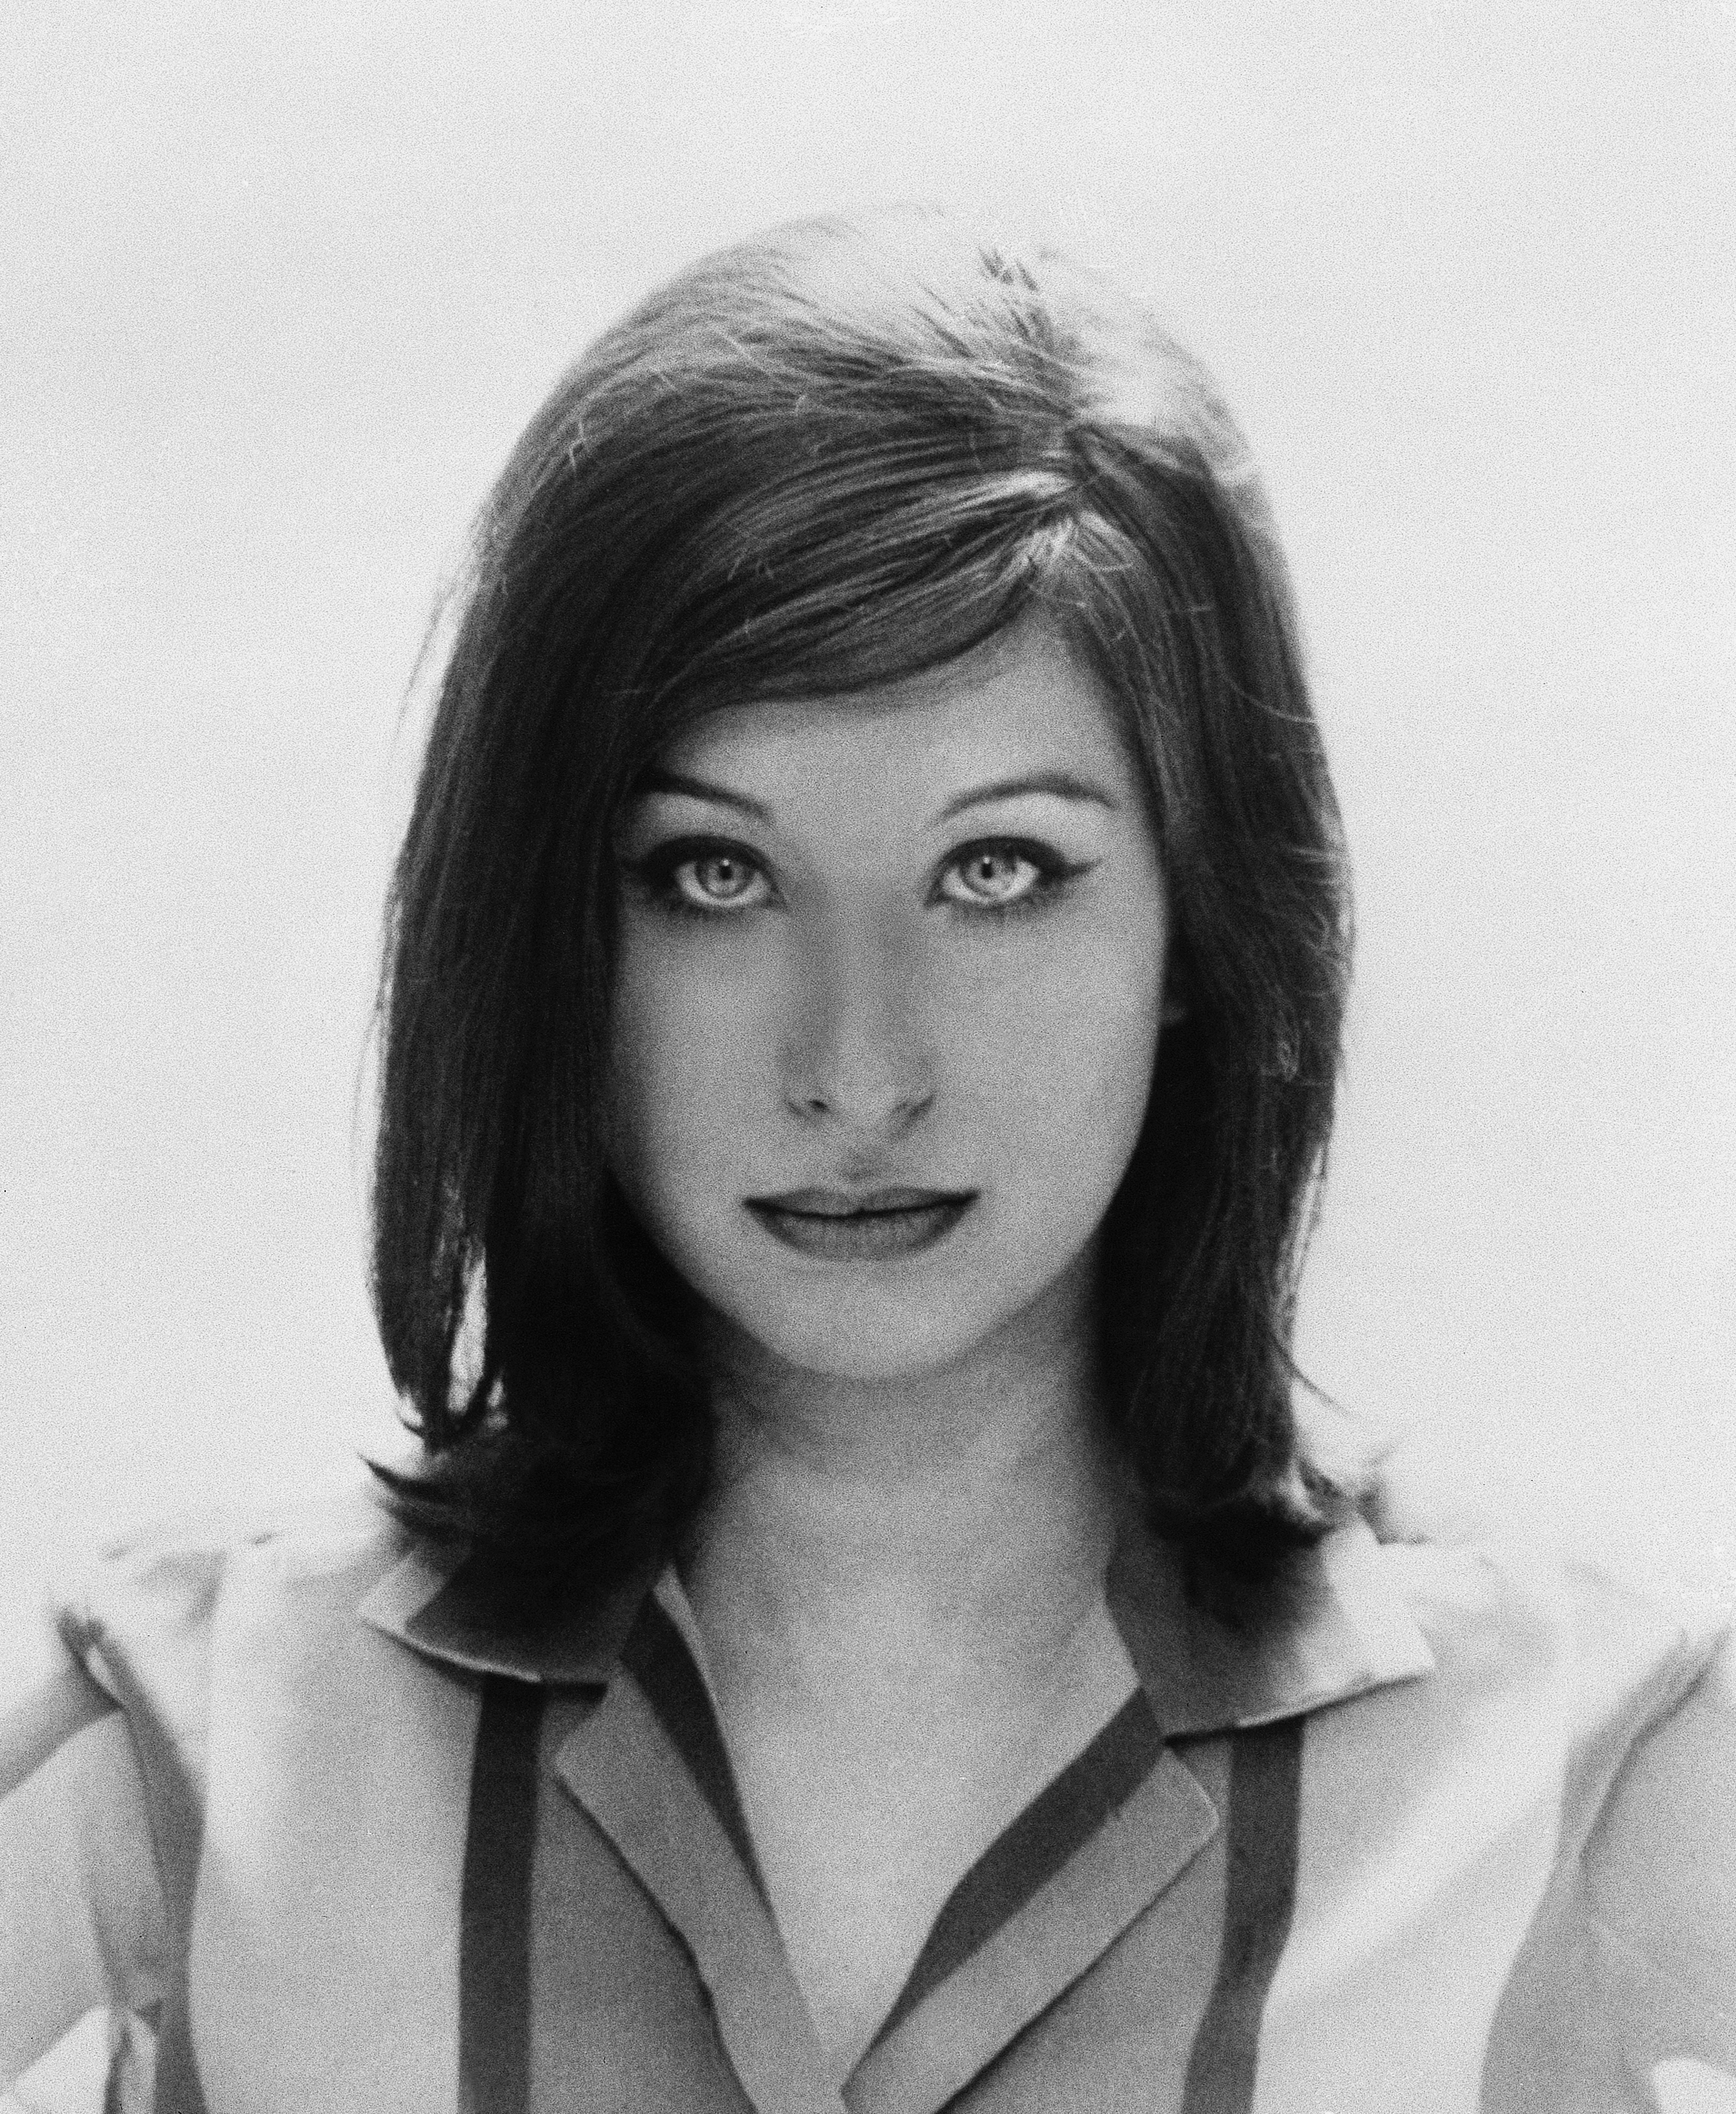 With shoulder-length straight hair